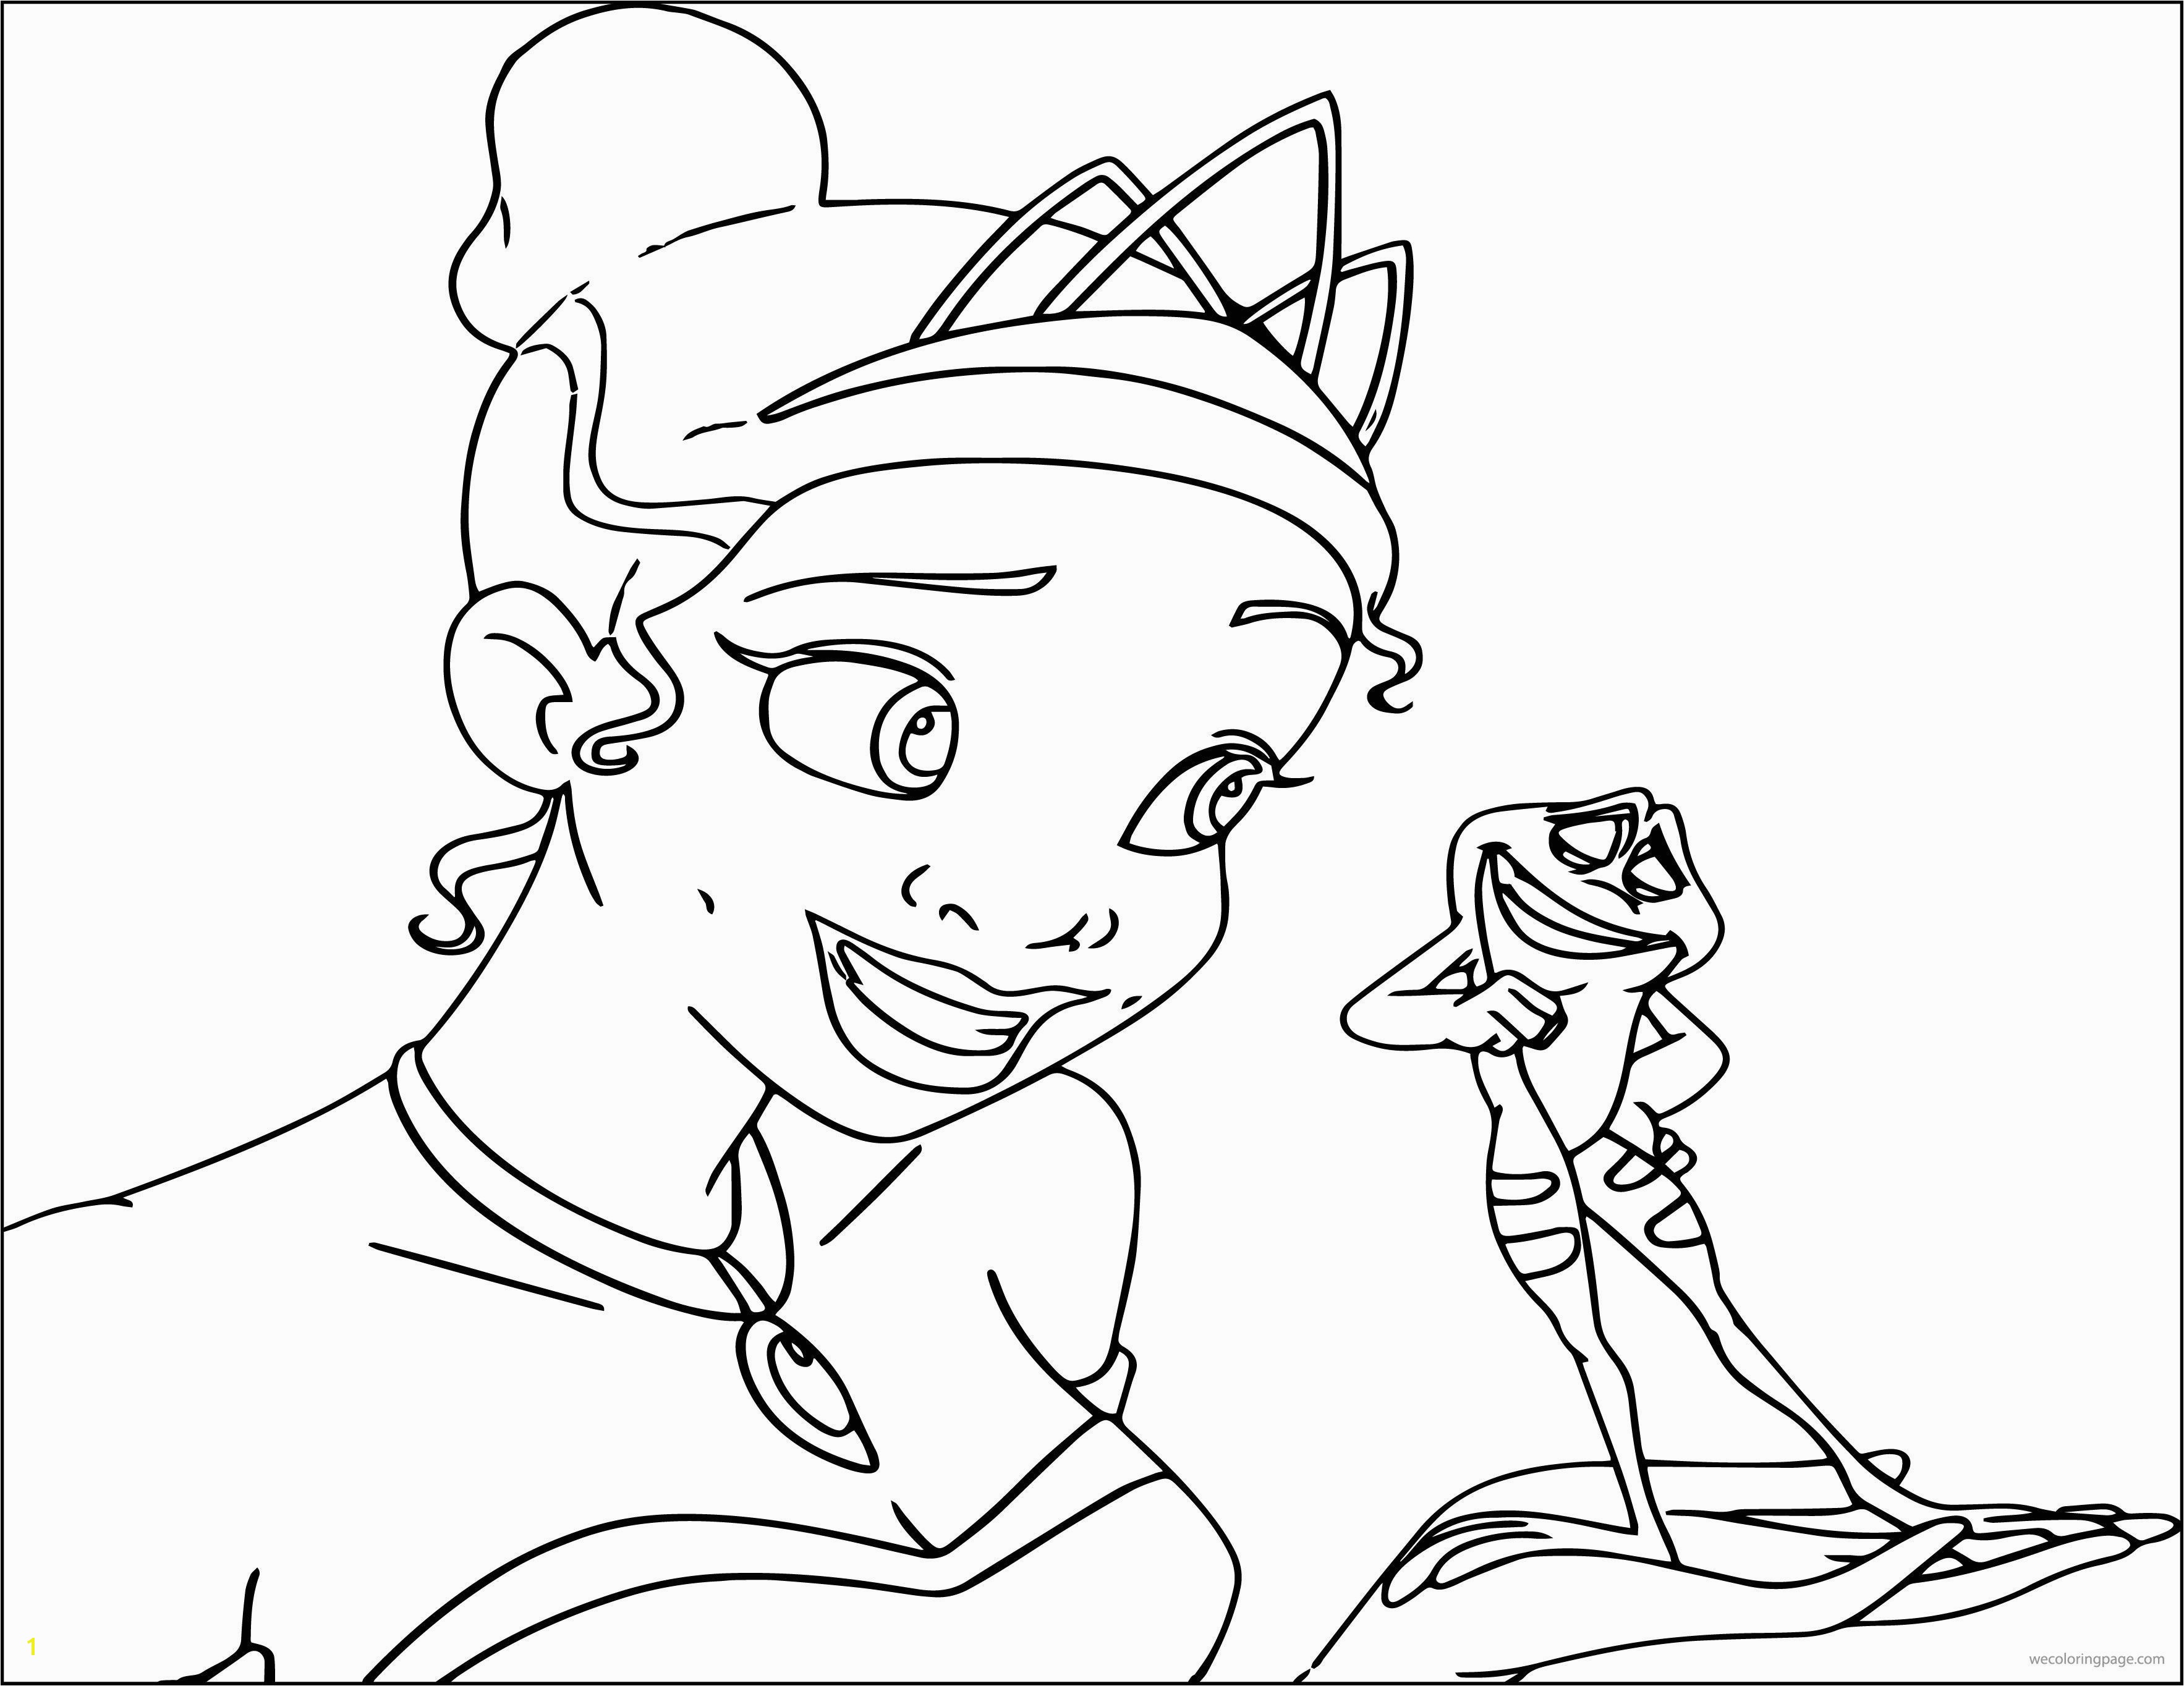 Aladdin Coloring Pages Fresh Disney the Princess and the Frog